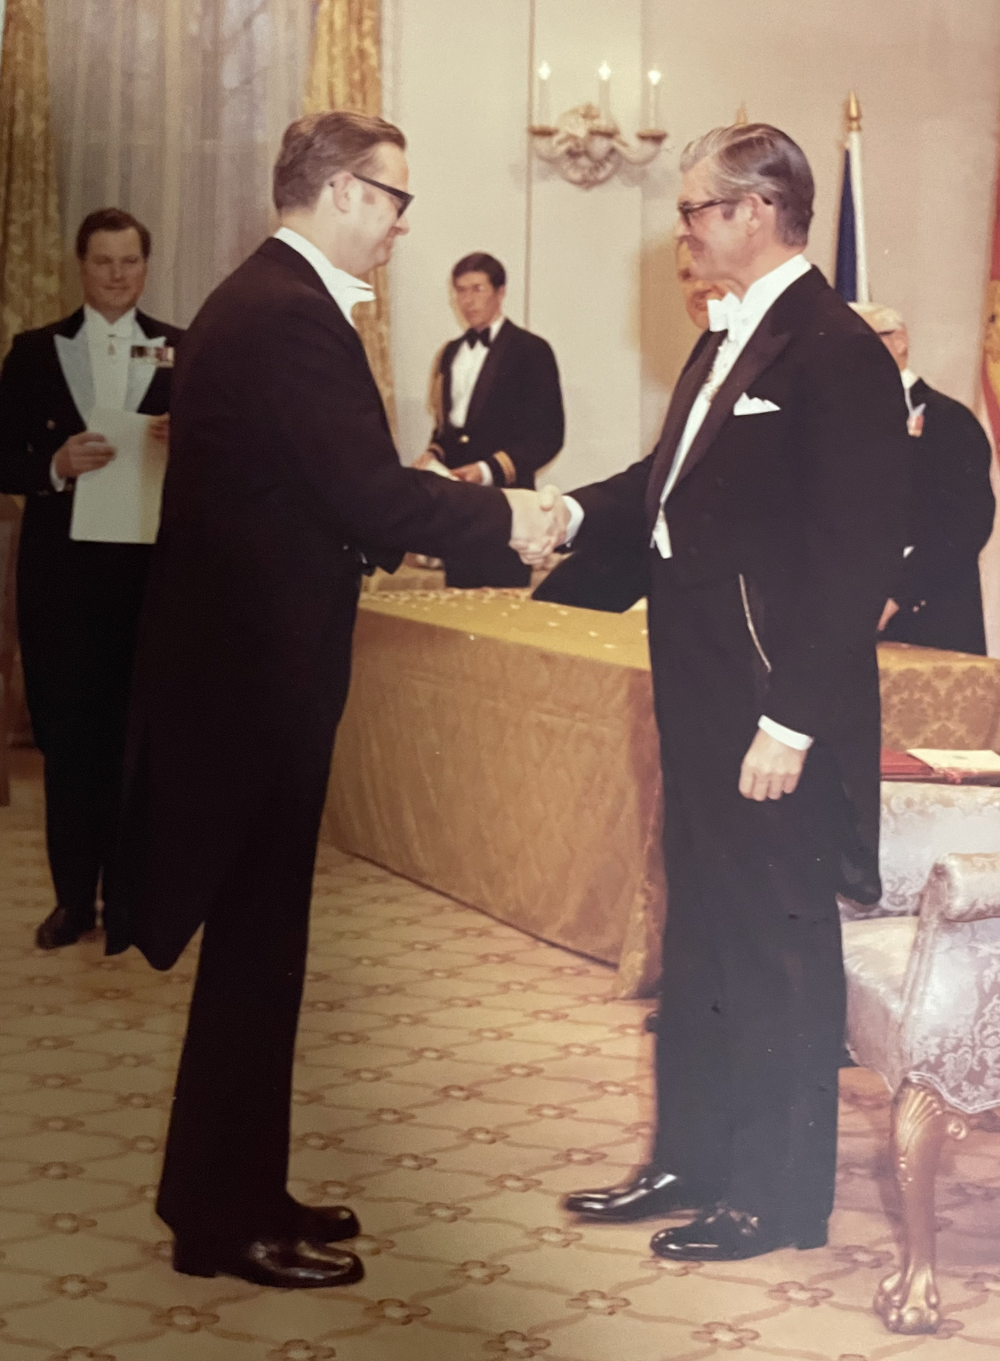 Receiving the Order of Canada, 1973